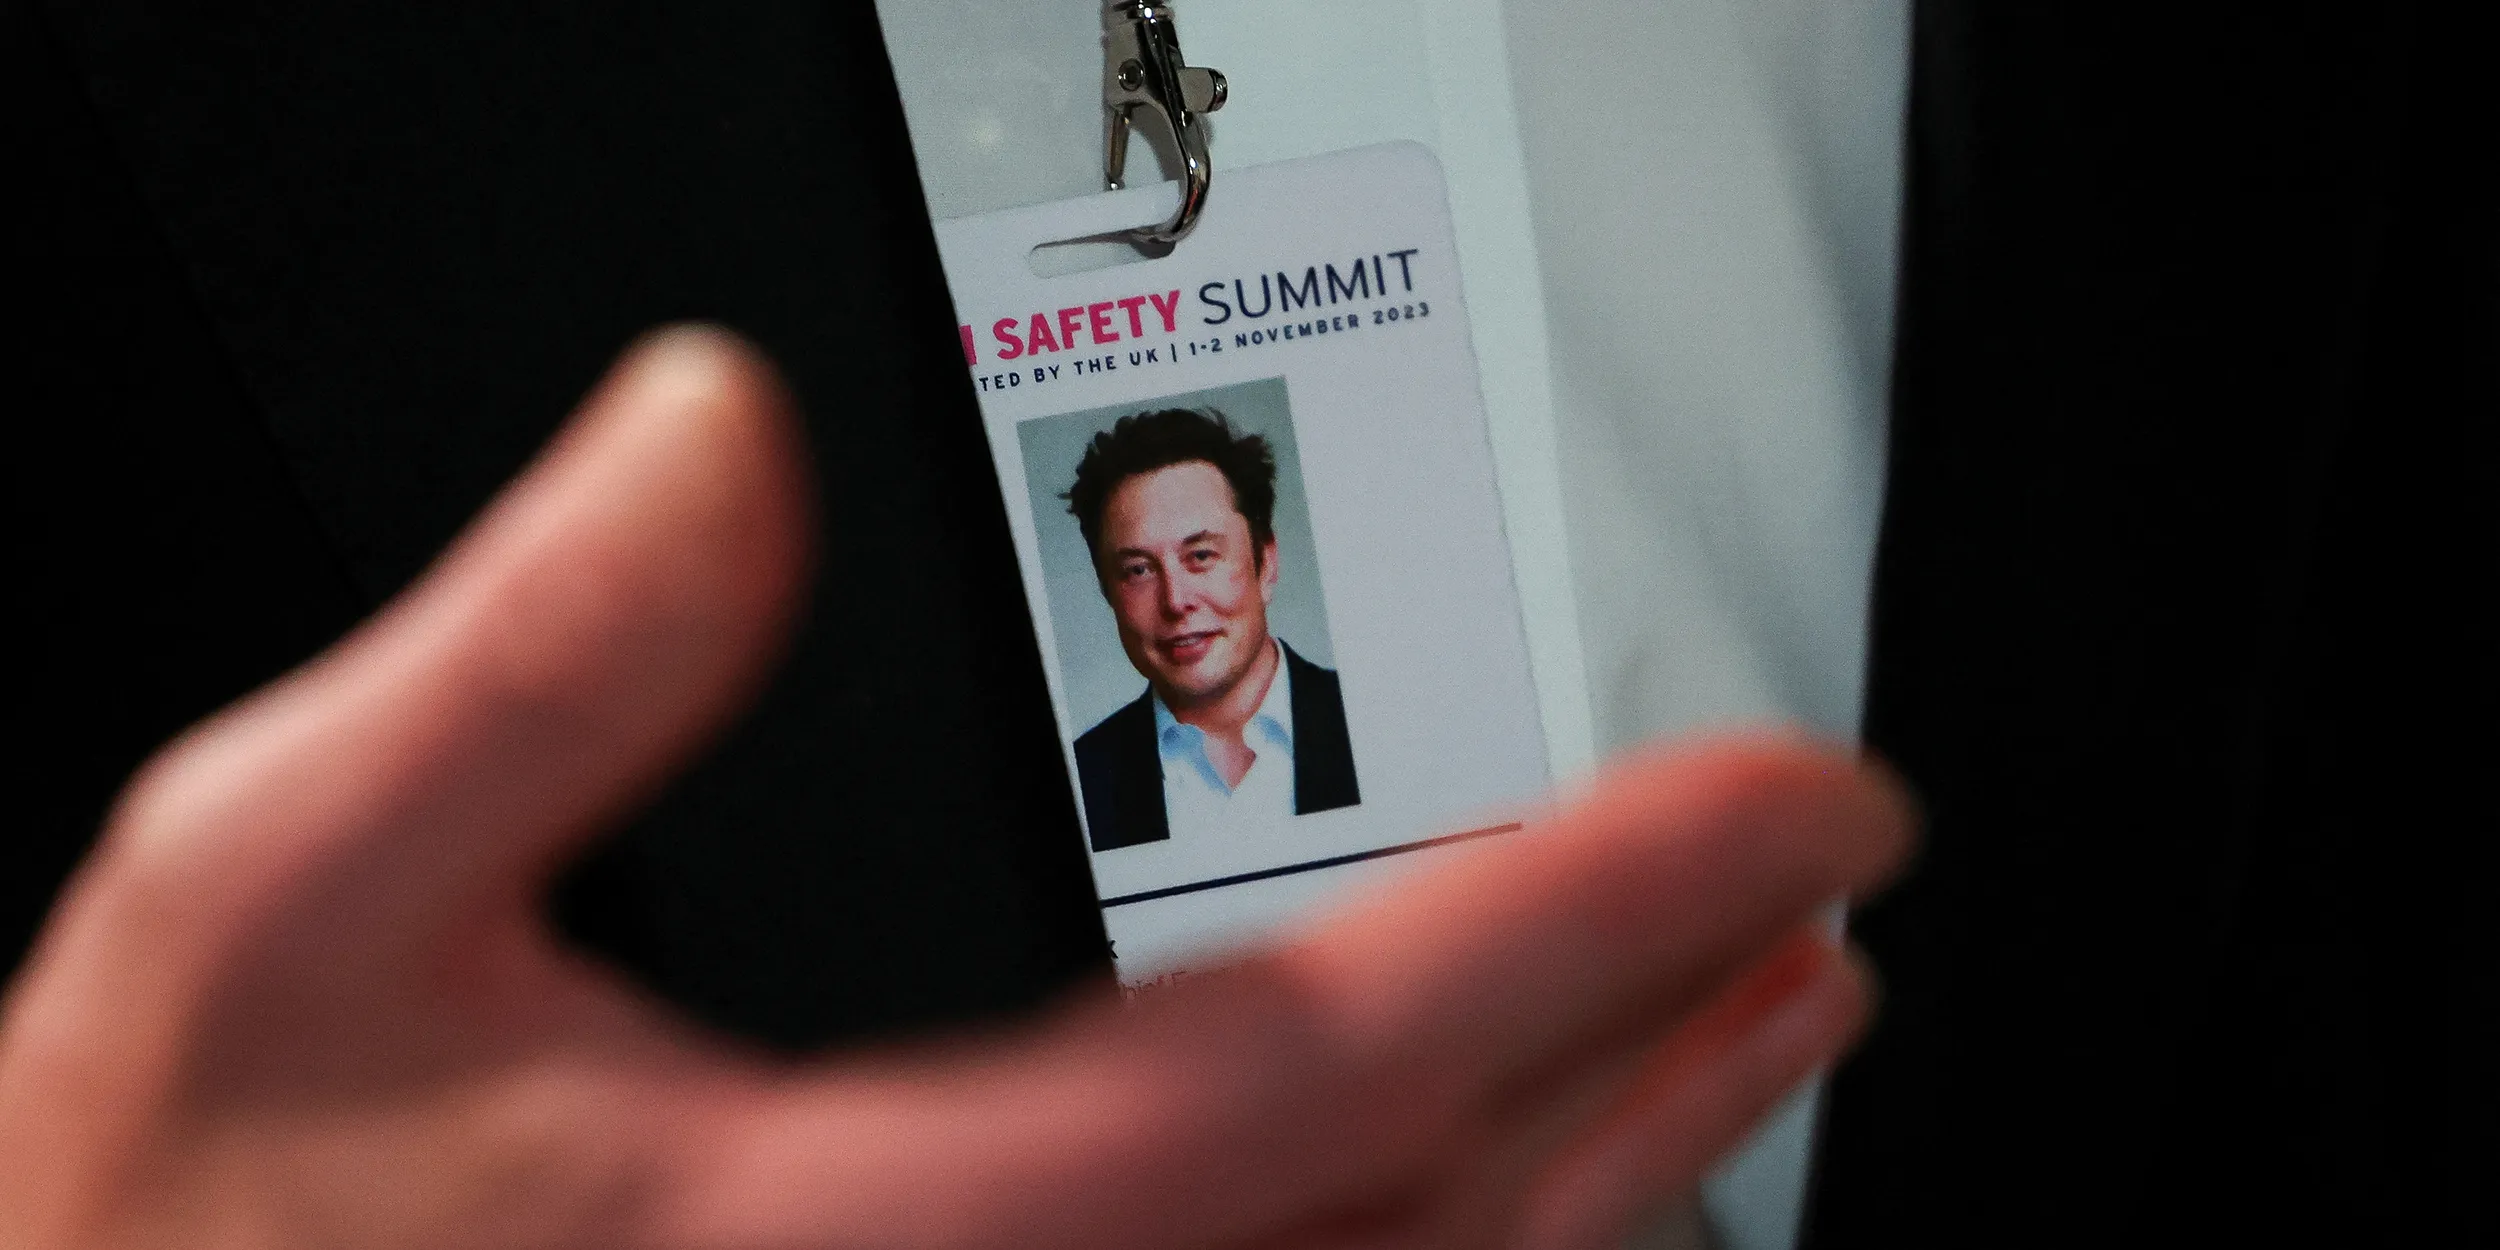 Con: X owner Elon Musk fought government surveillance, while profiting off state surveillance